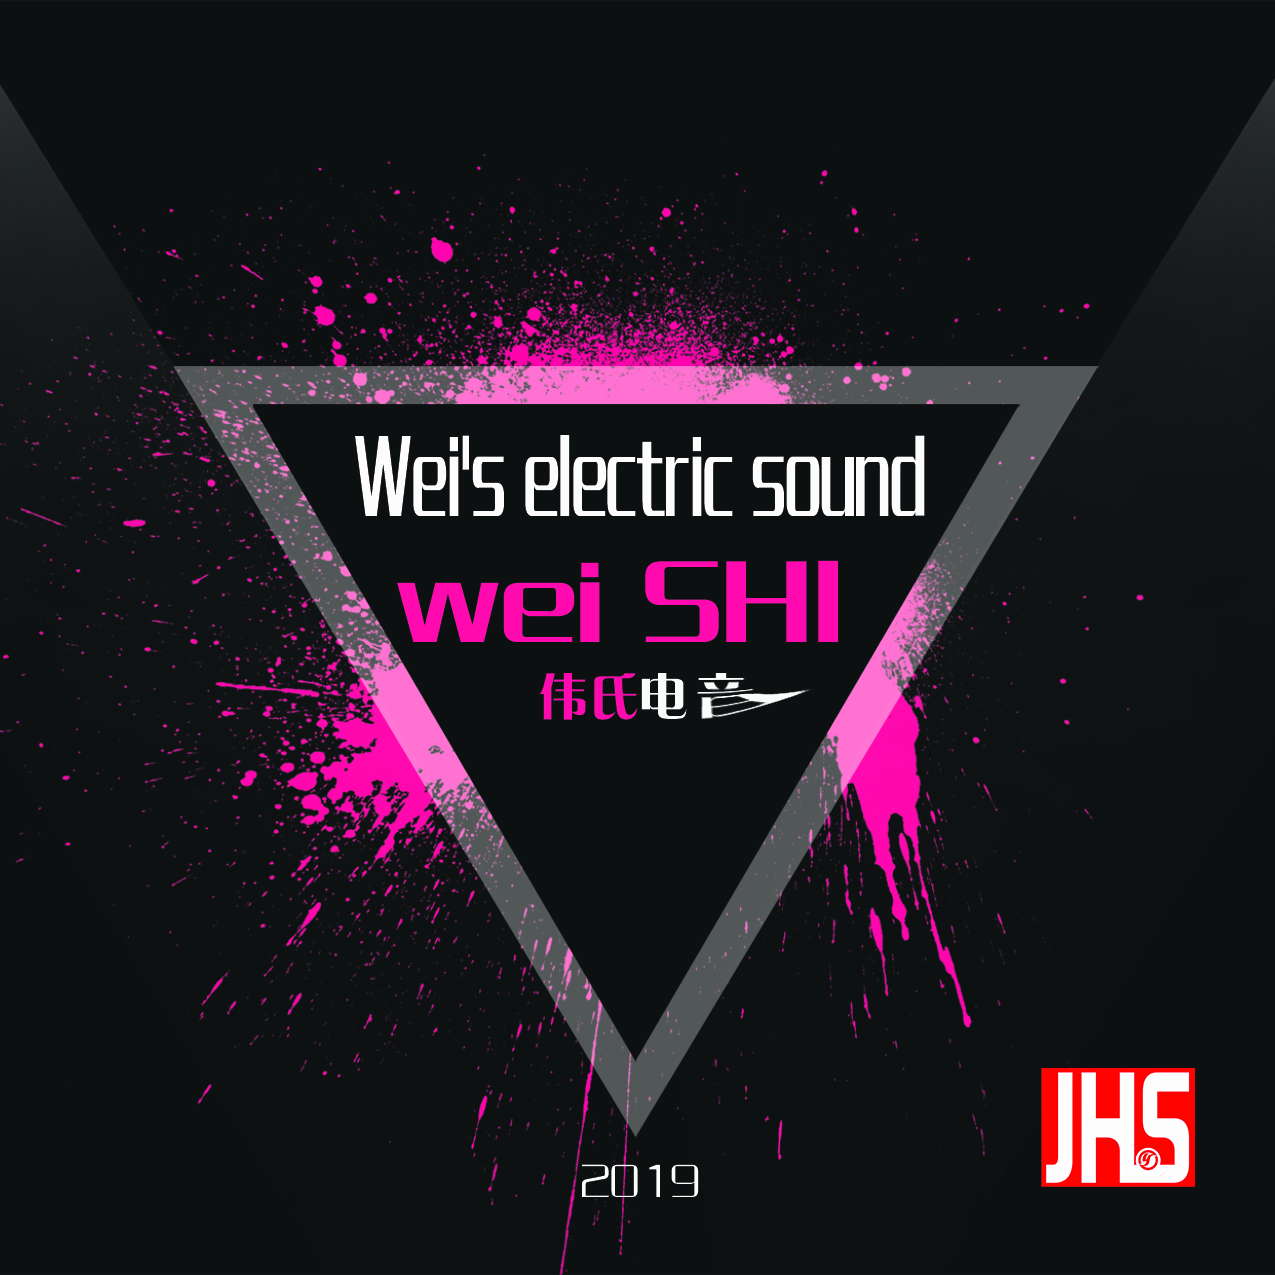 Weis electric sound